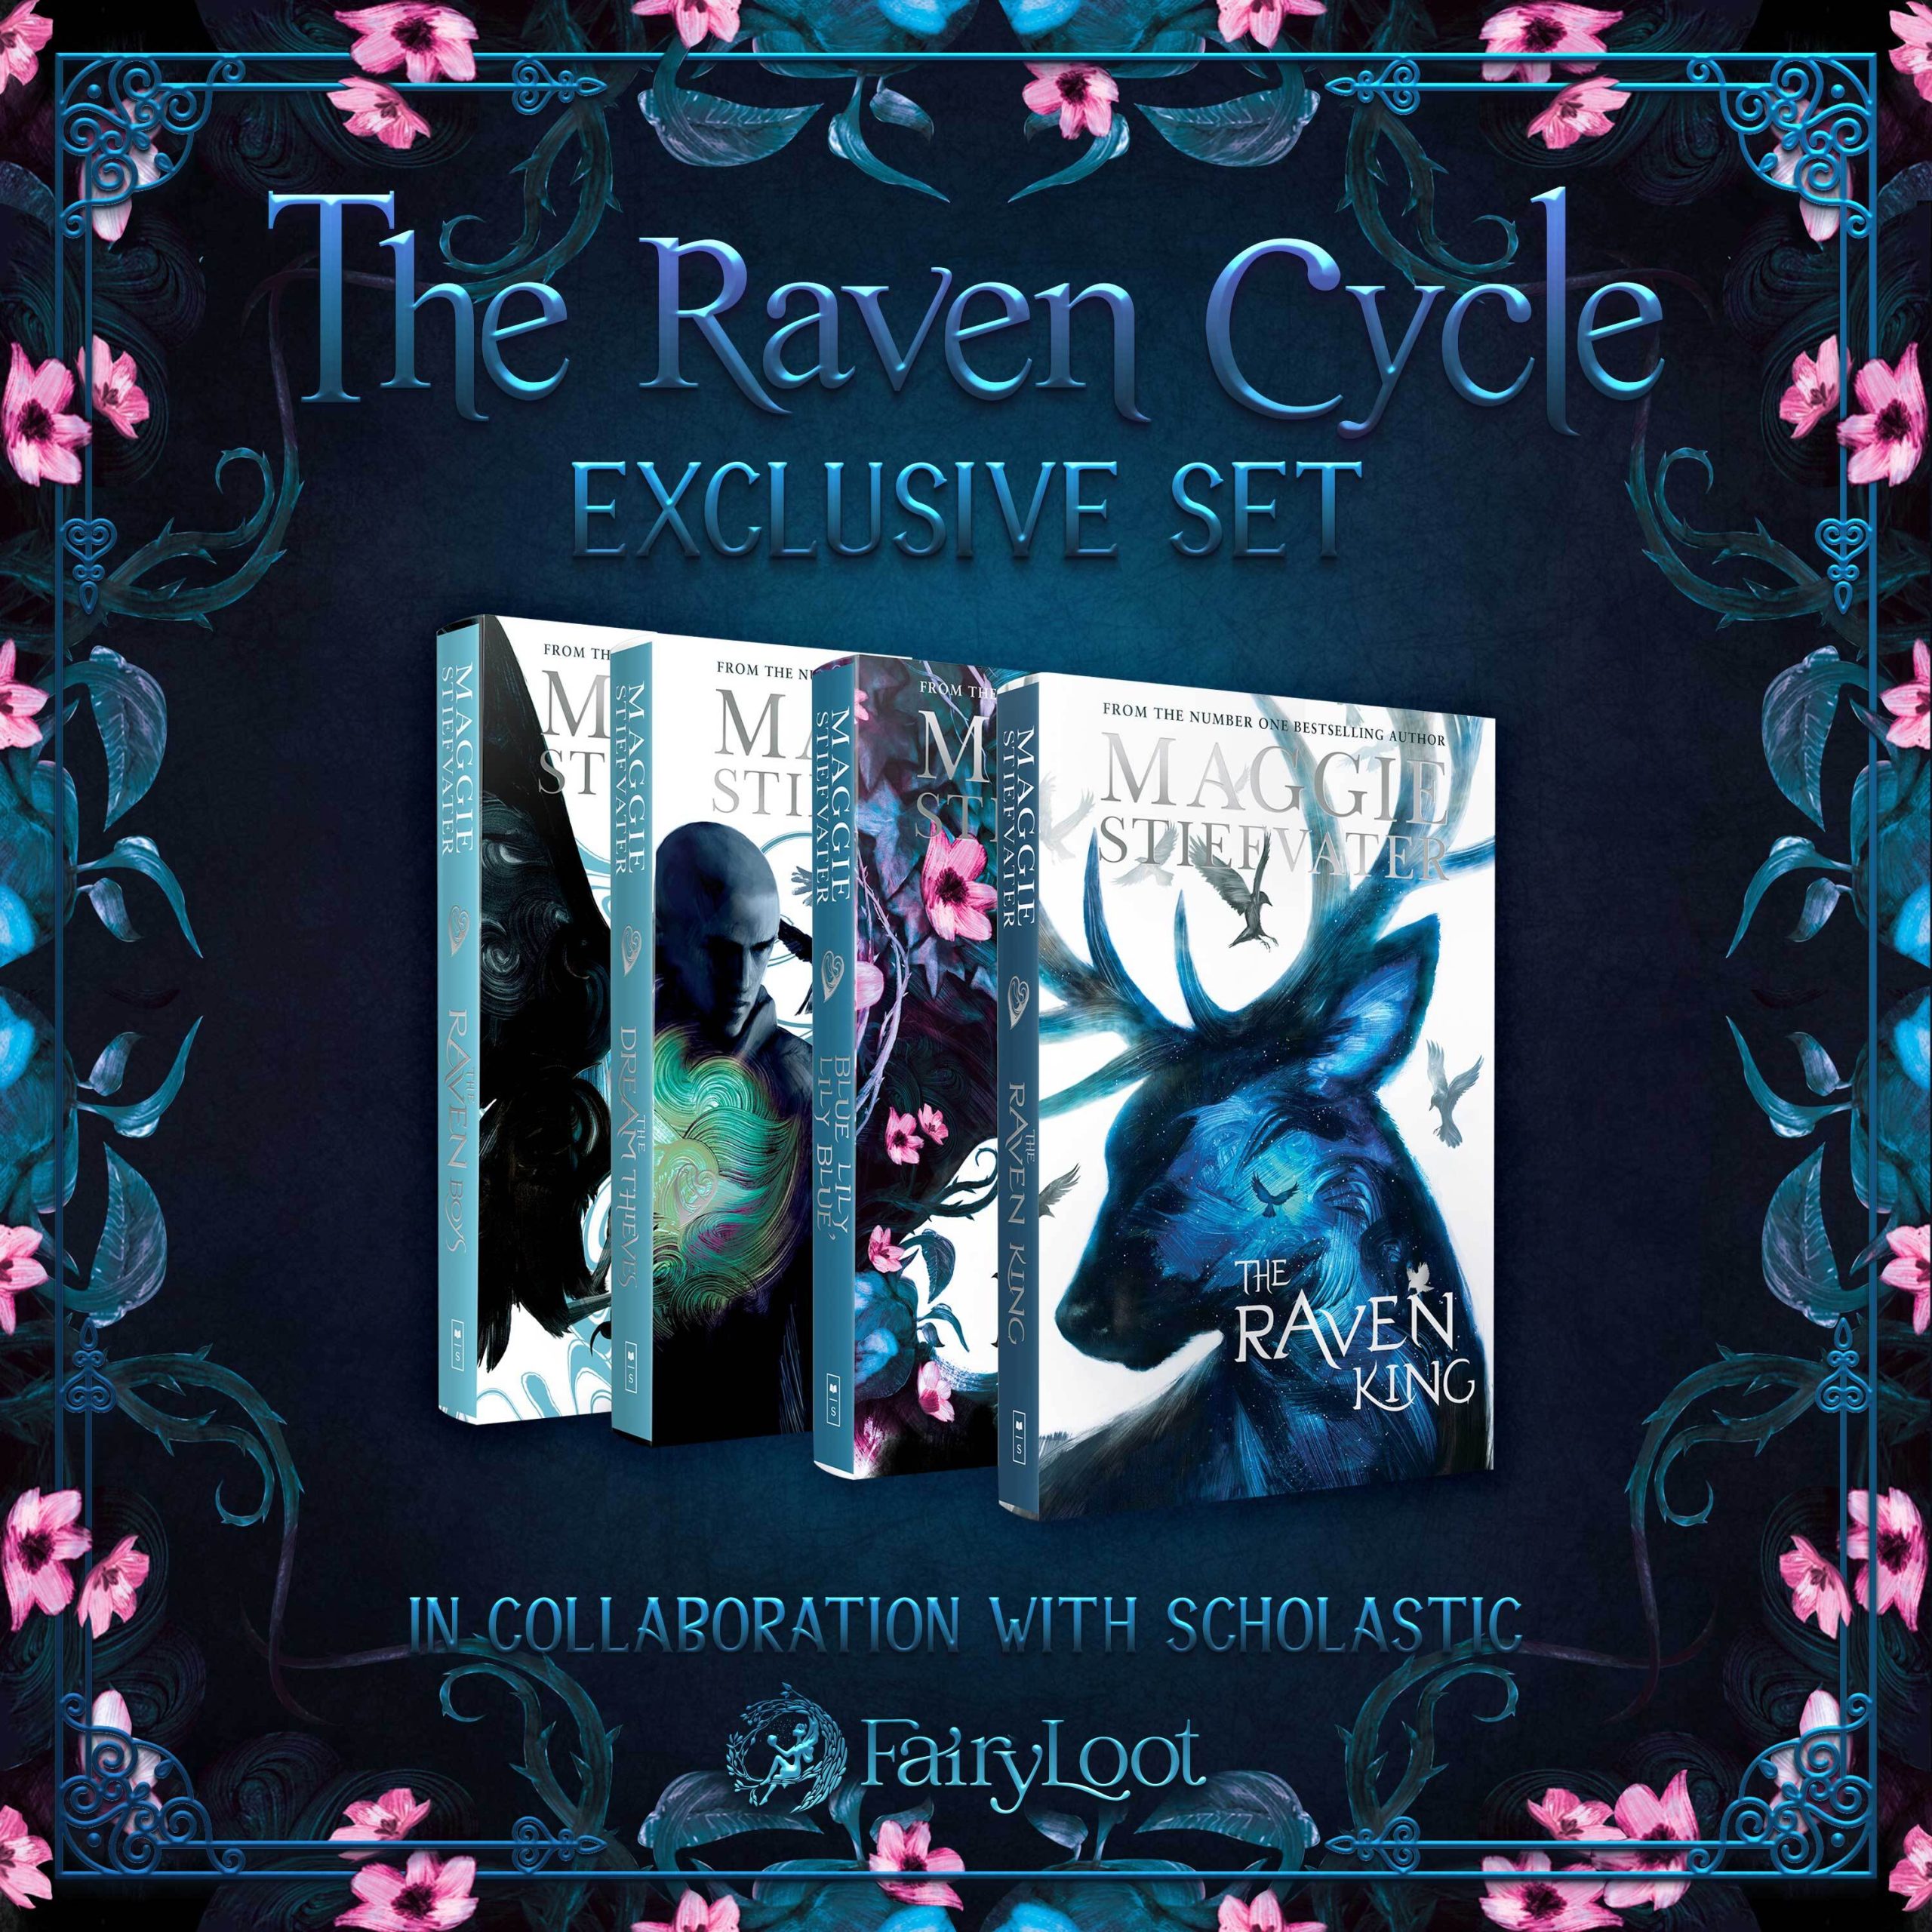 The Raven Cycle Exclusive Editions